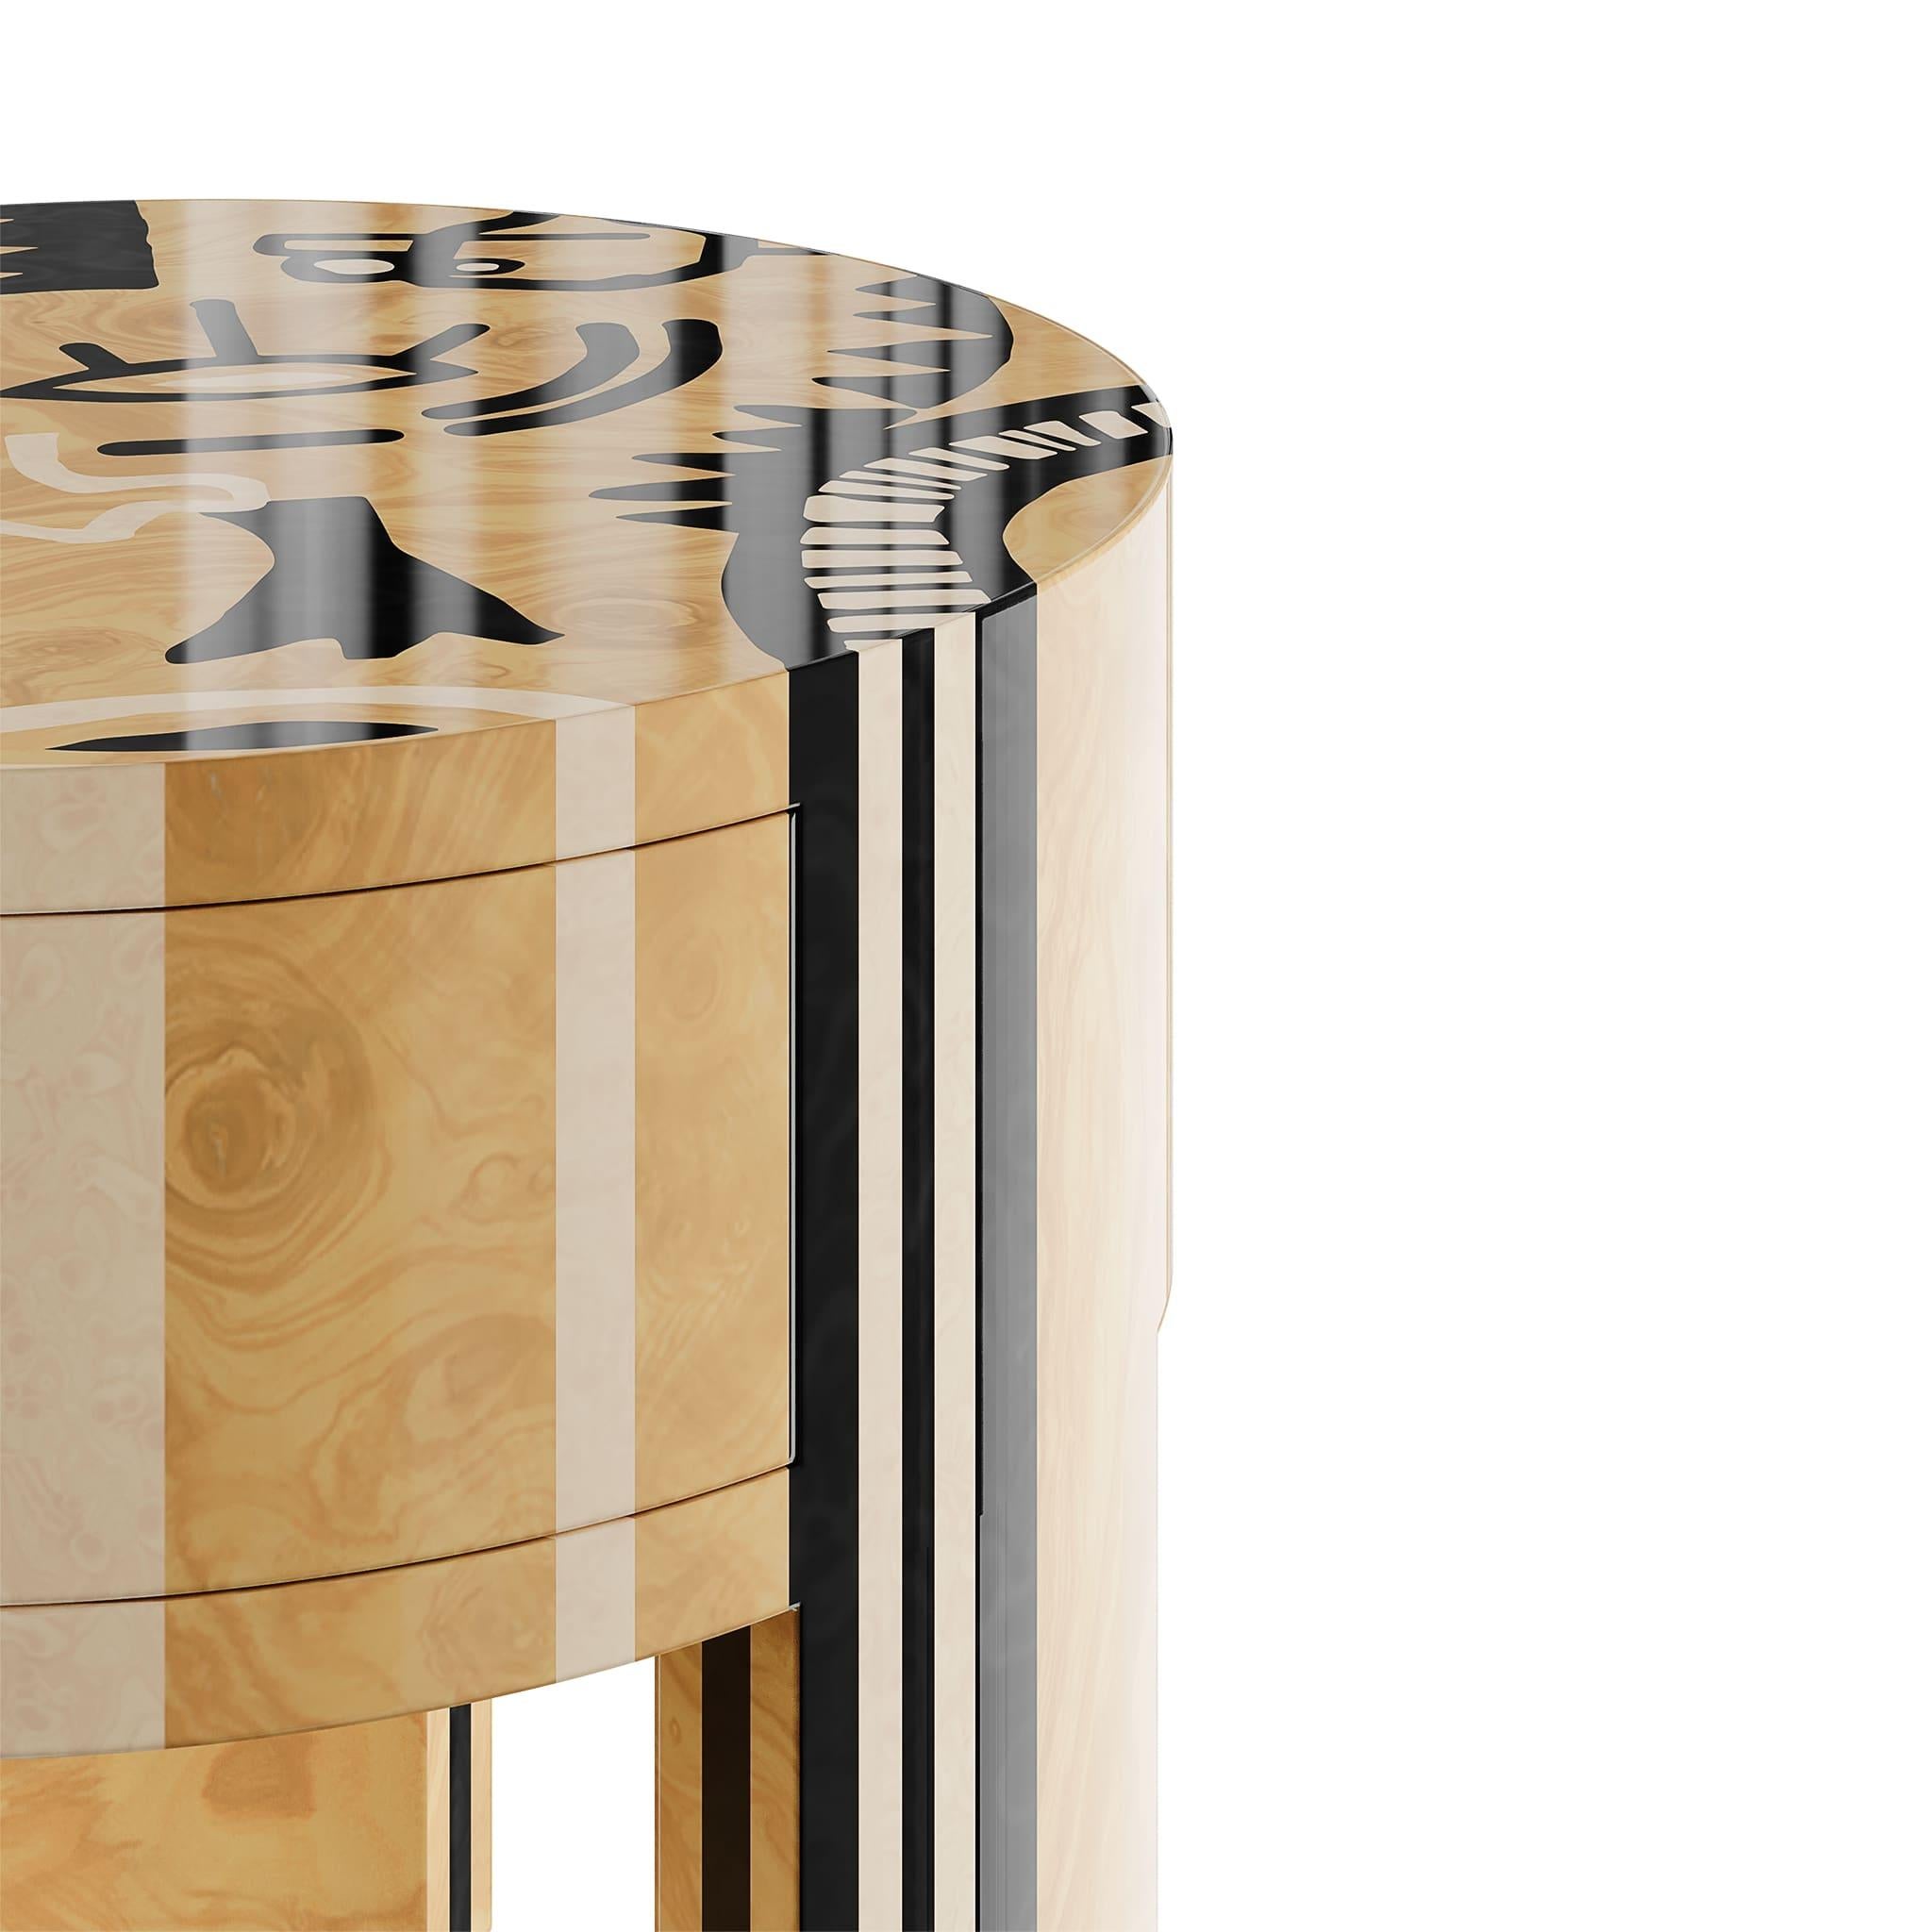 Folk Bedside Table adds an unmistakable design style to your home. This modern round bedside is a bold furniture piece that will uplift the look of any contemporary bedroom decor.
The three-legged bedside table features modern marquetry details, a